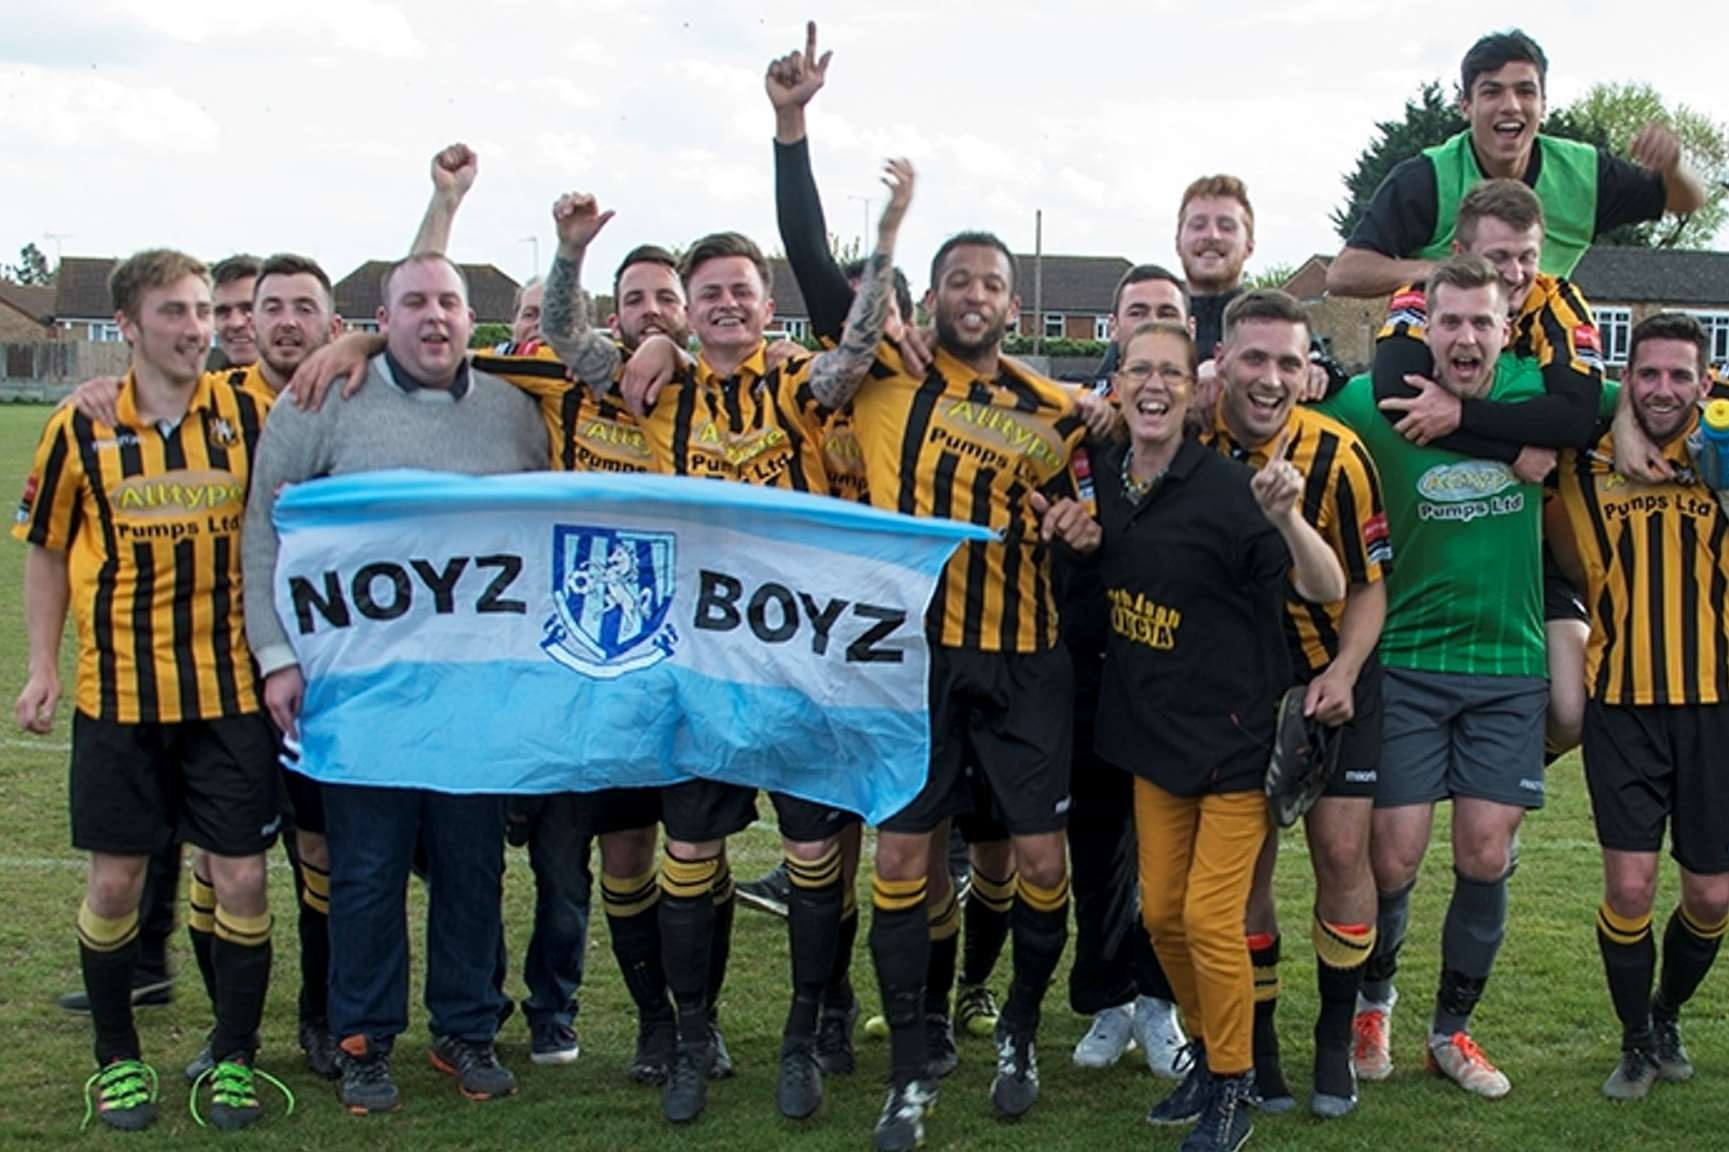 Folkestone celebrate with fans after securing their place in the Ryman Premier Division for next season